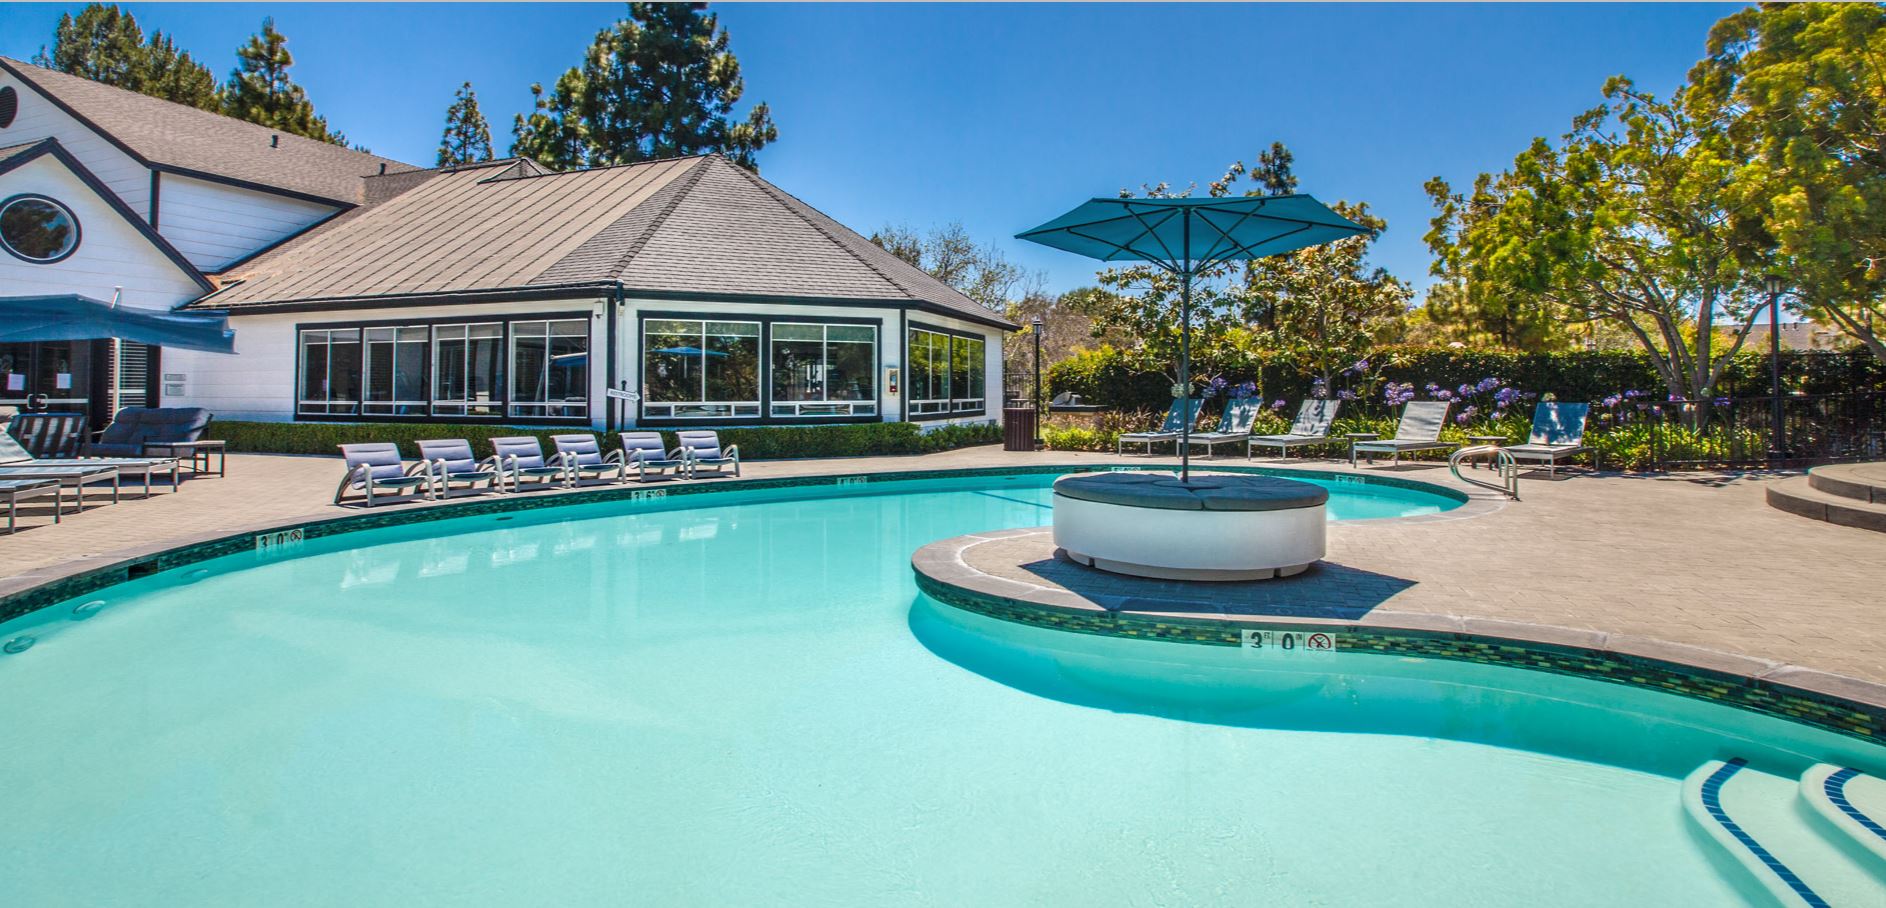 Large pool in front of clubhouse with seating and umbrella